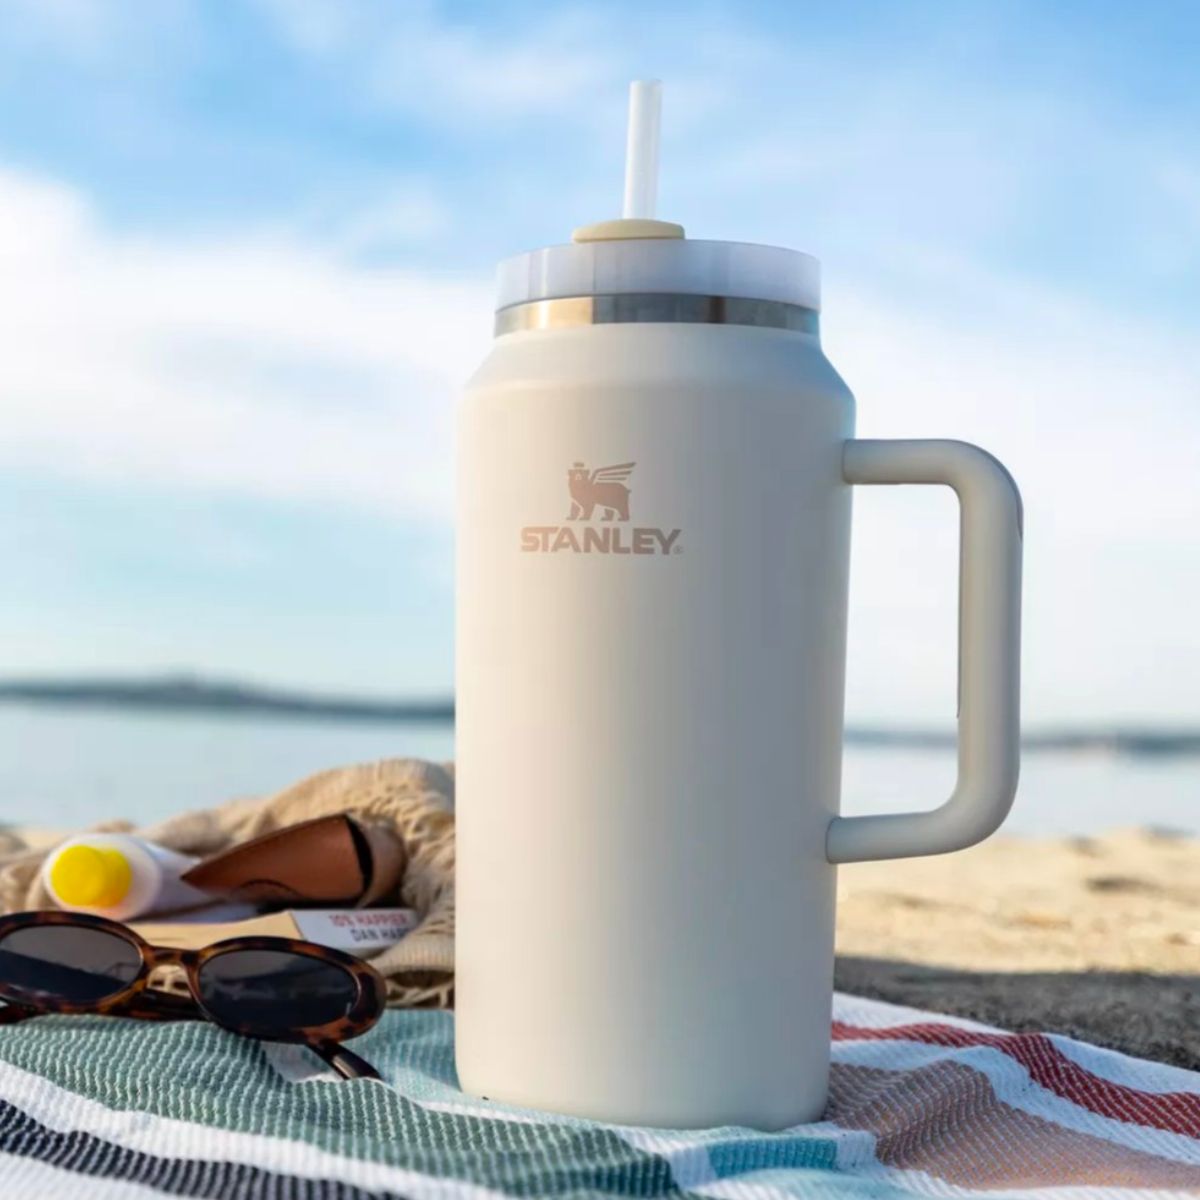 THE QUENCHER H2.0 FLOWSTATE tumbler sitting on a blanket at the beach